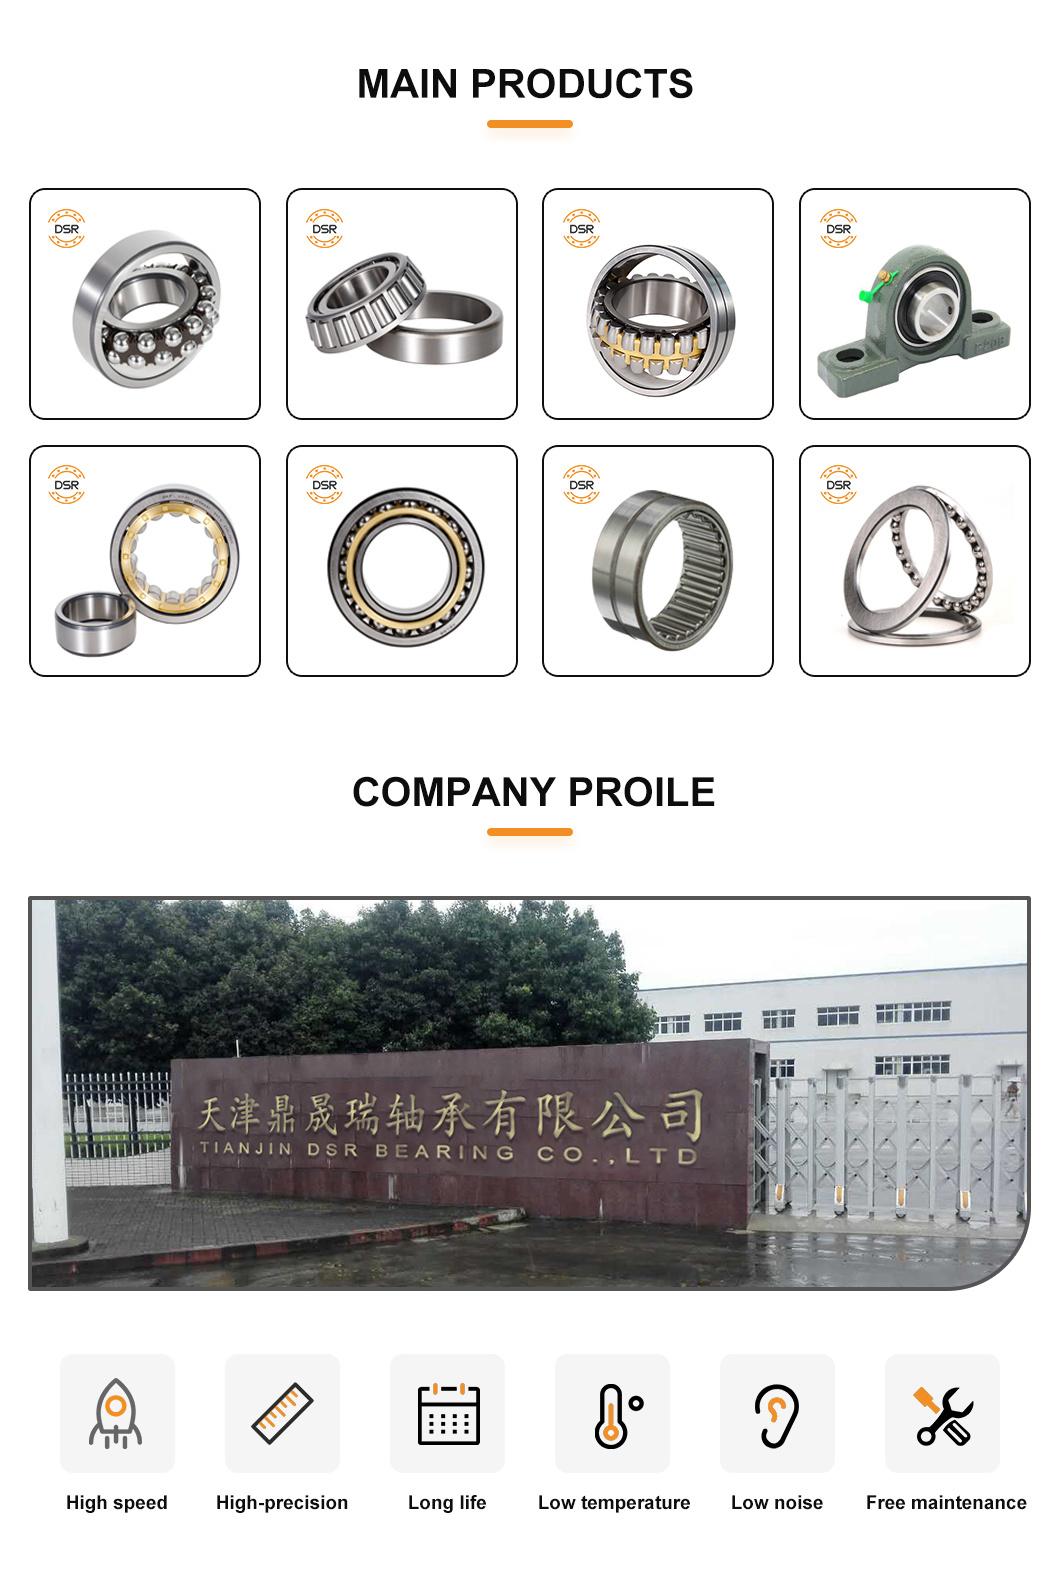 Deep Groove Ball Bearing Angular Contact Ball Bearing/Spherical/Tapered/Cylindrical/Needle/Thrust/Pillow Block Roller Bearing Engine Motorcycle Auto Spare Parts